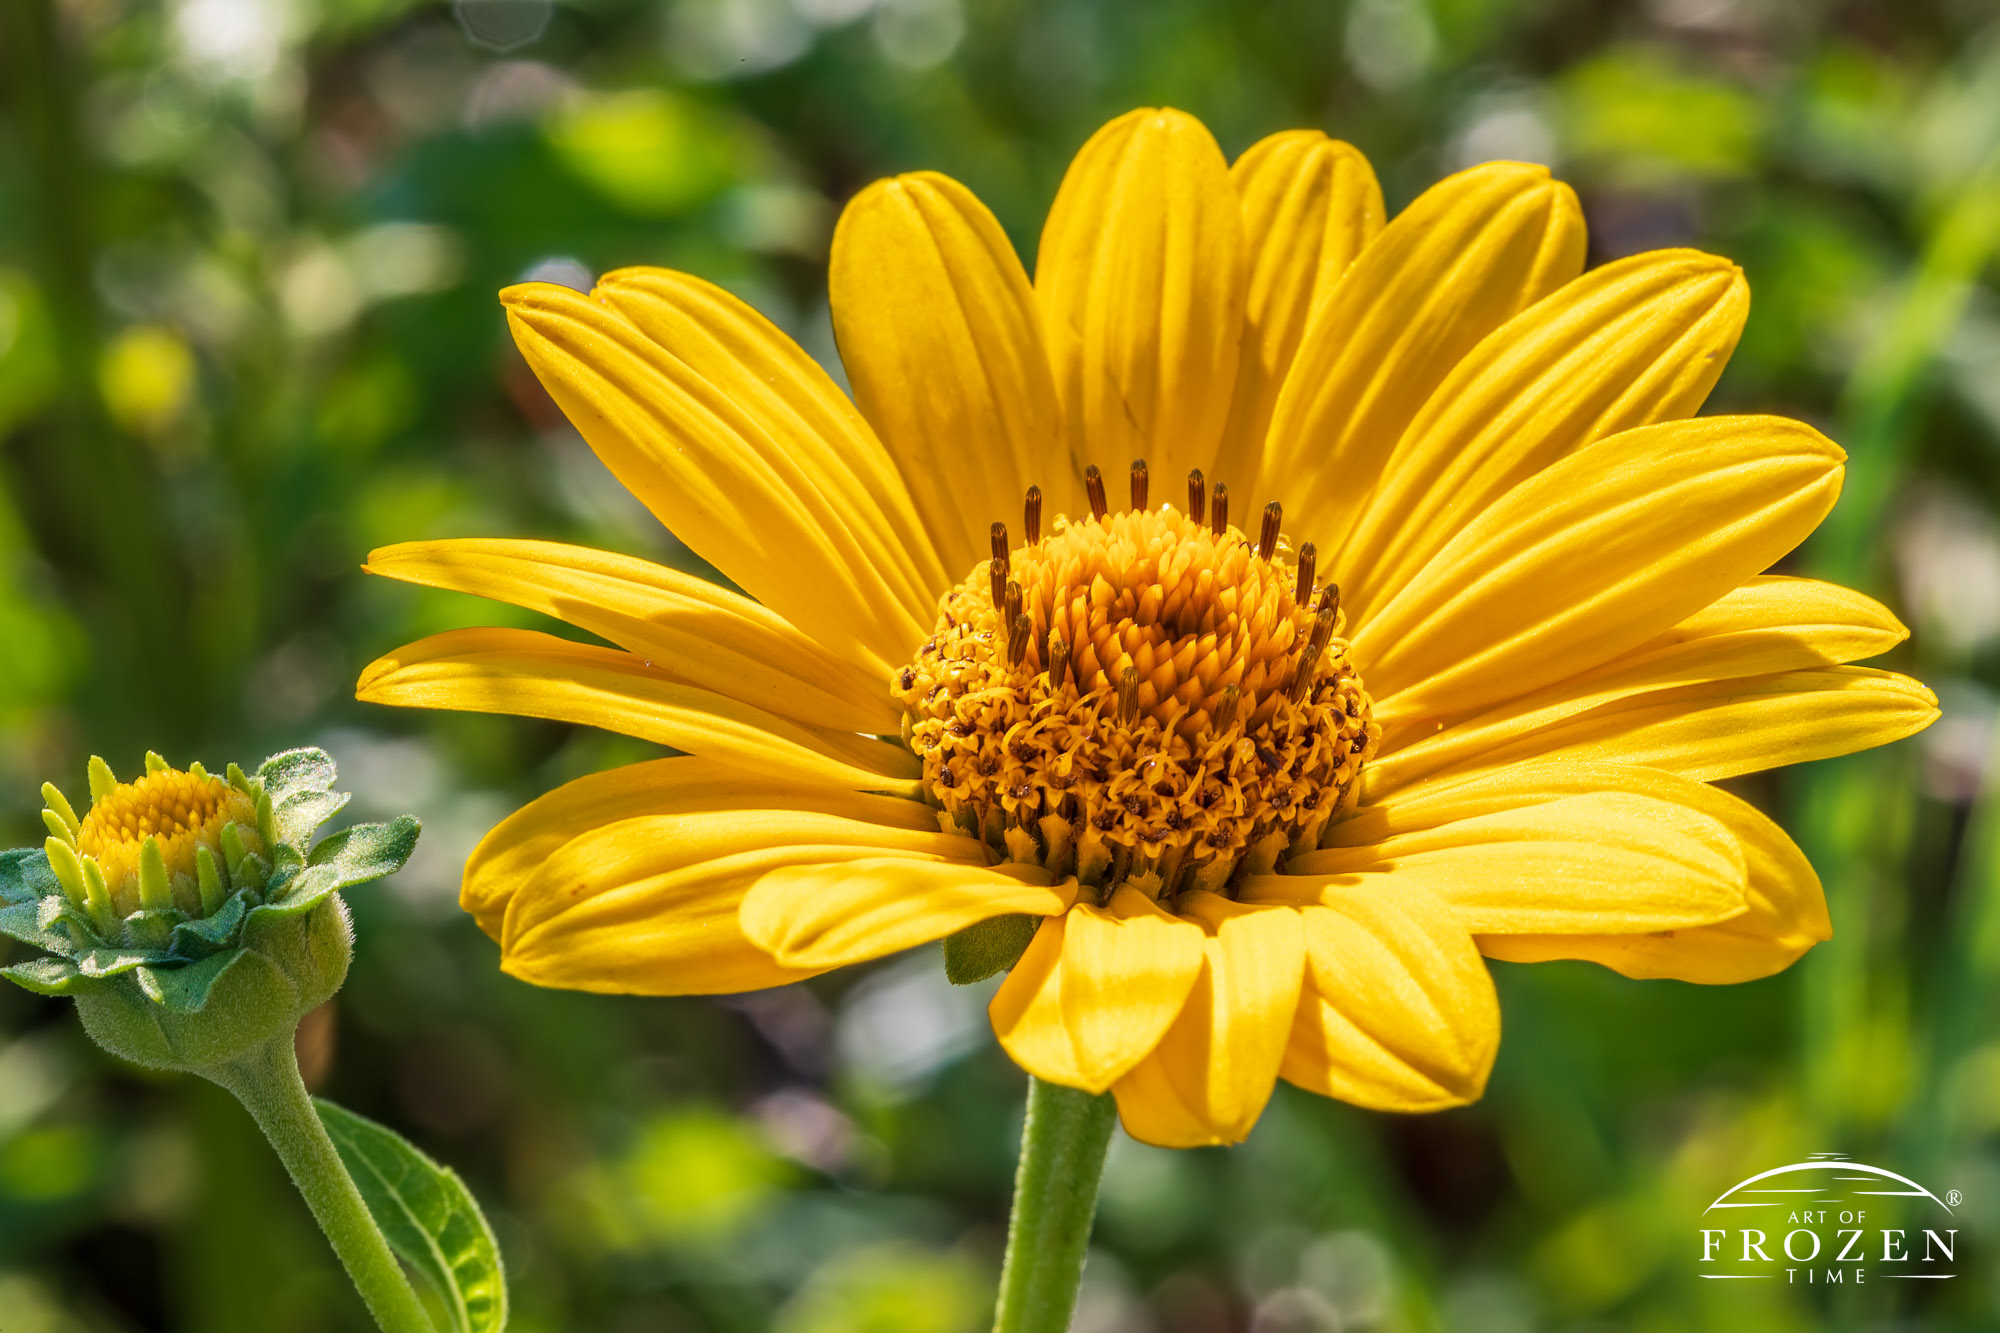 Intimate views of an Ox-eye Sunflower whose bright yellow petals surround a sunflower like center.